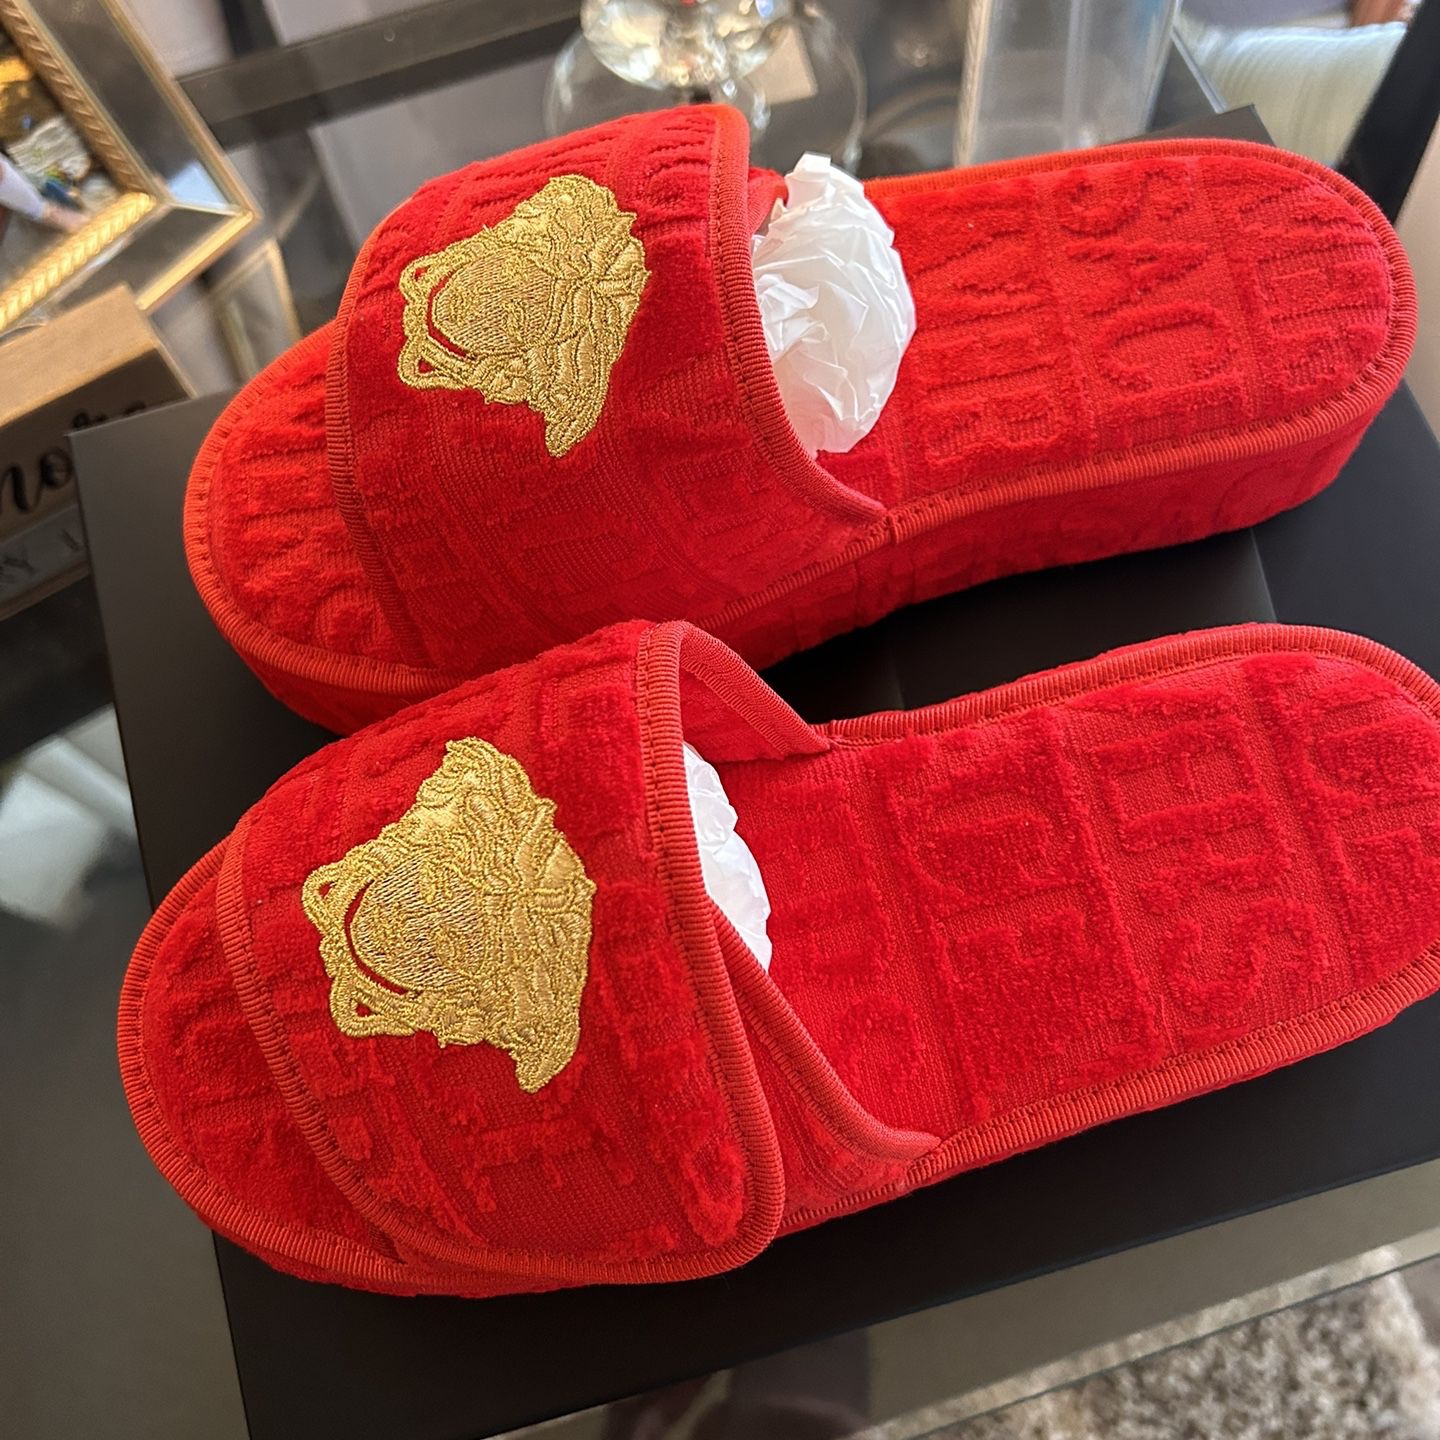 Brand New Versace Slippers for Seattle, WA - OfferUp